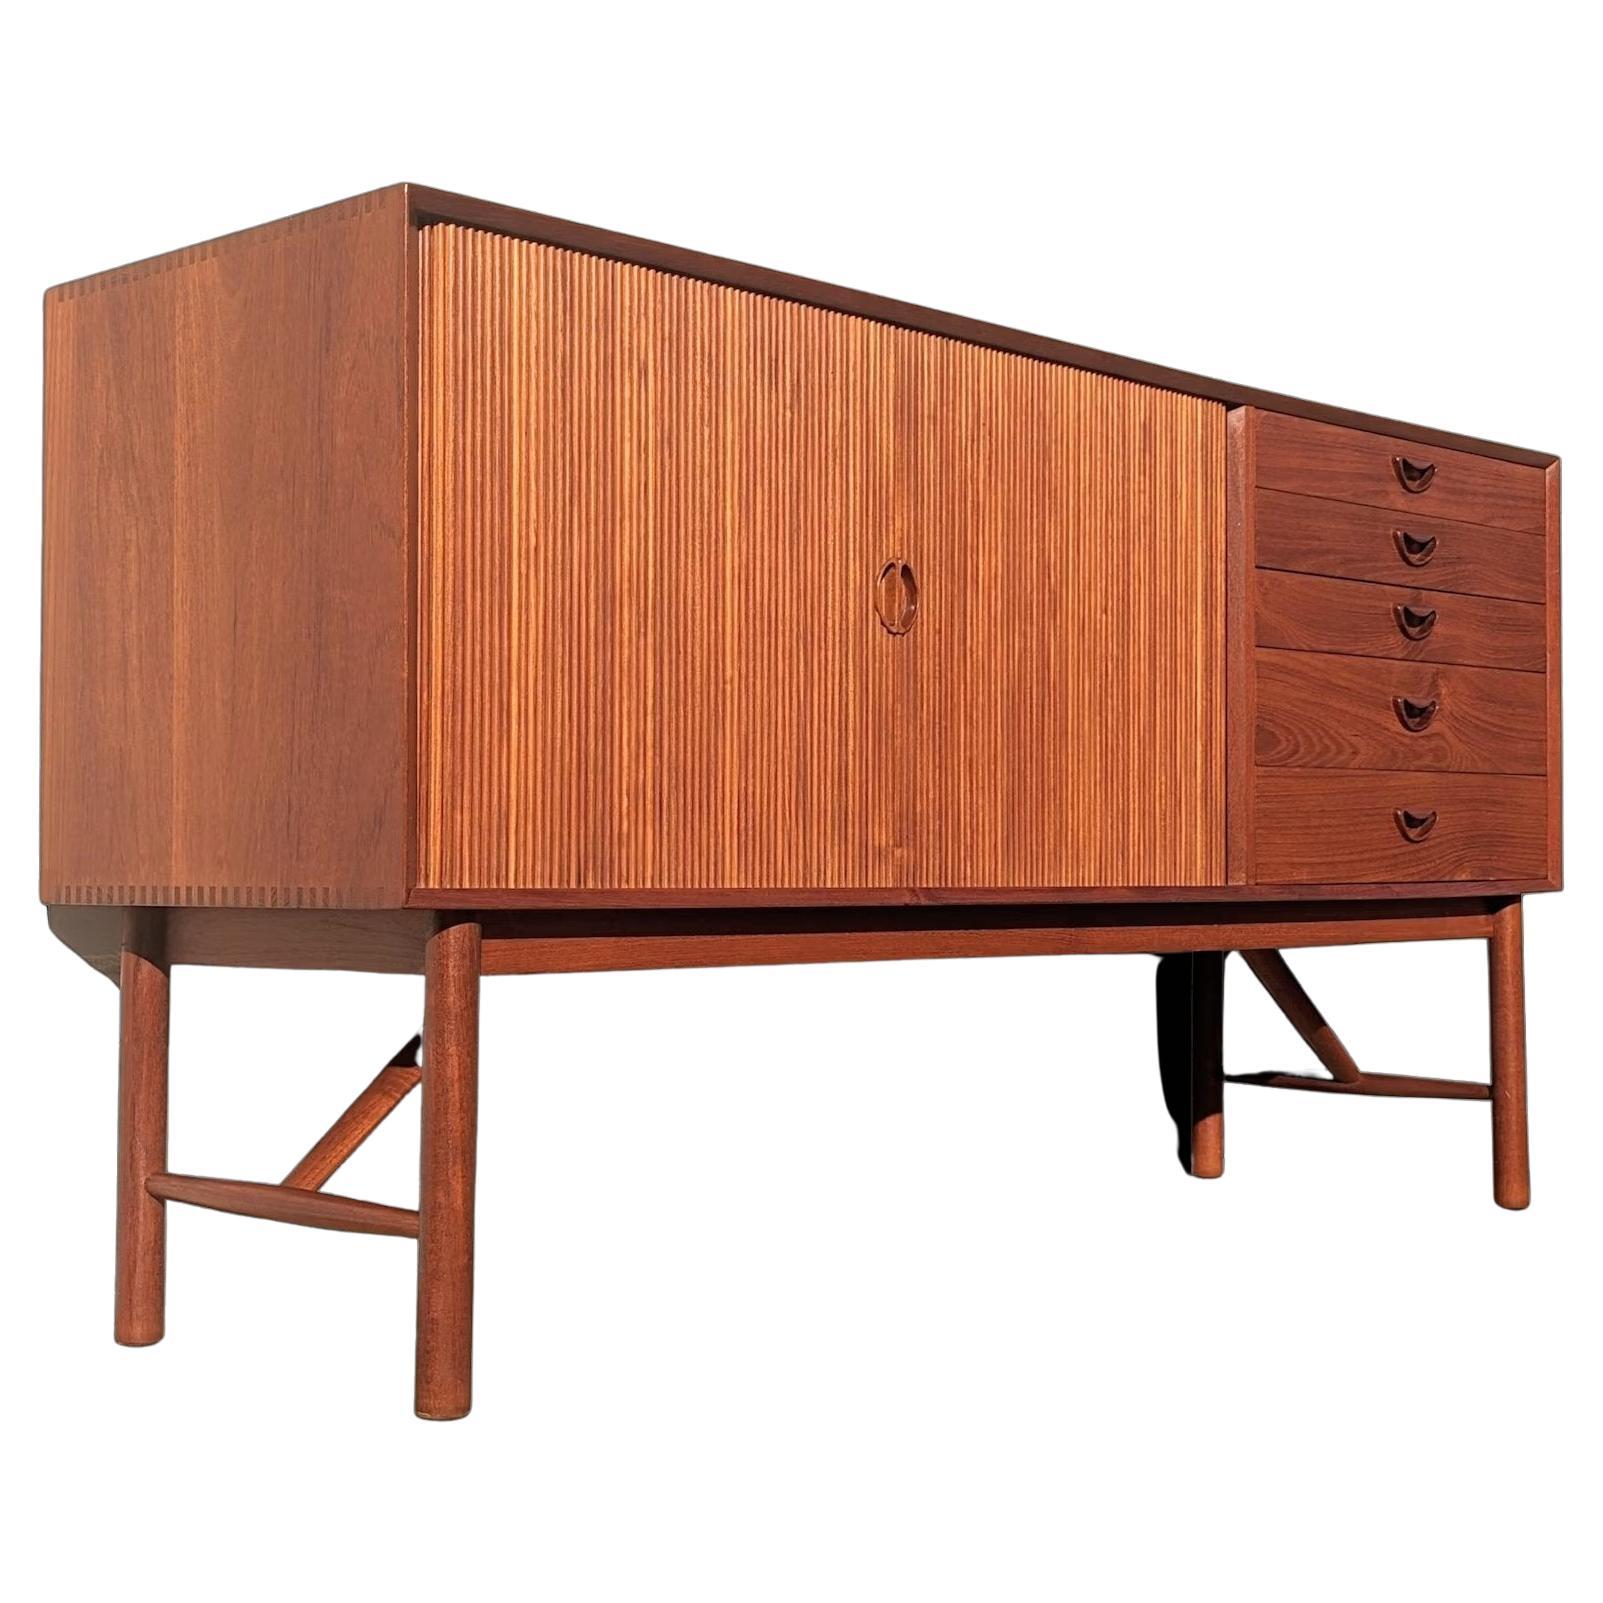 Mid Century Danish Modern Tambour Door Sideboard by Hvidt & Molgaard

Above average vintage condition and structurally sound. Has some expected very slight finish wear and scratching. Very good condition. Has one small clear drop of what appears to